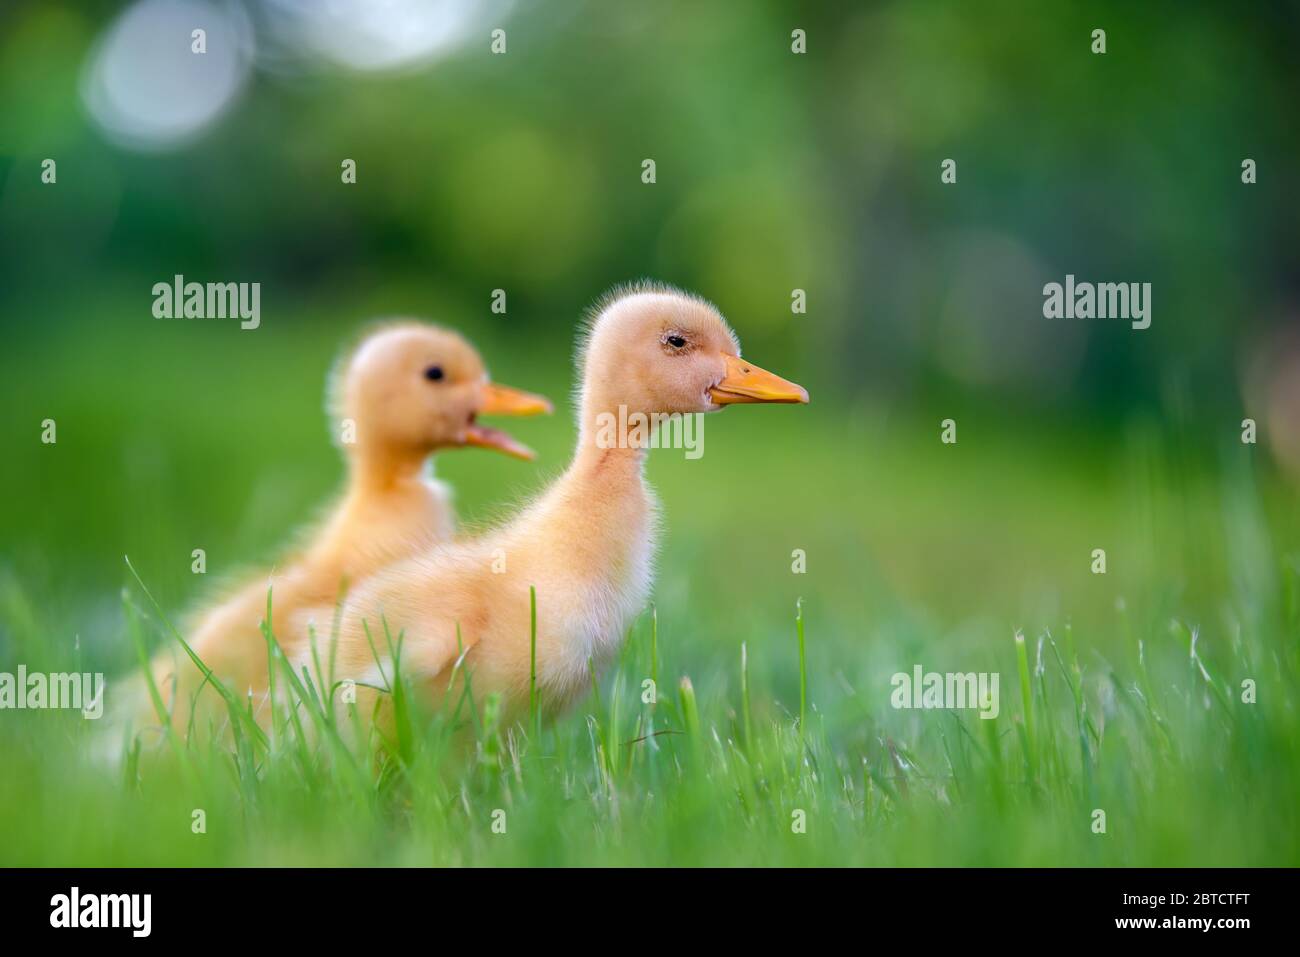 Funny  Little yellow duckling on spring green grass. Farm concept Stock Photo